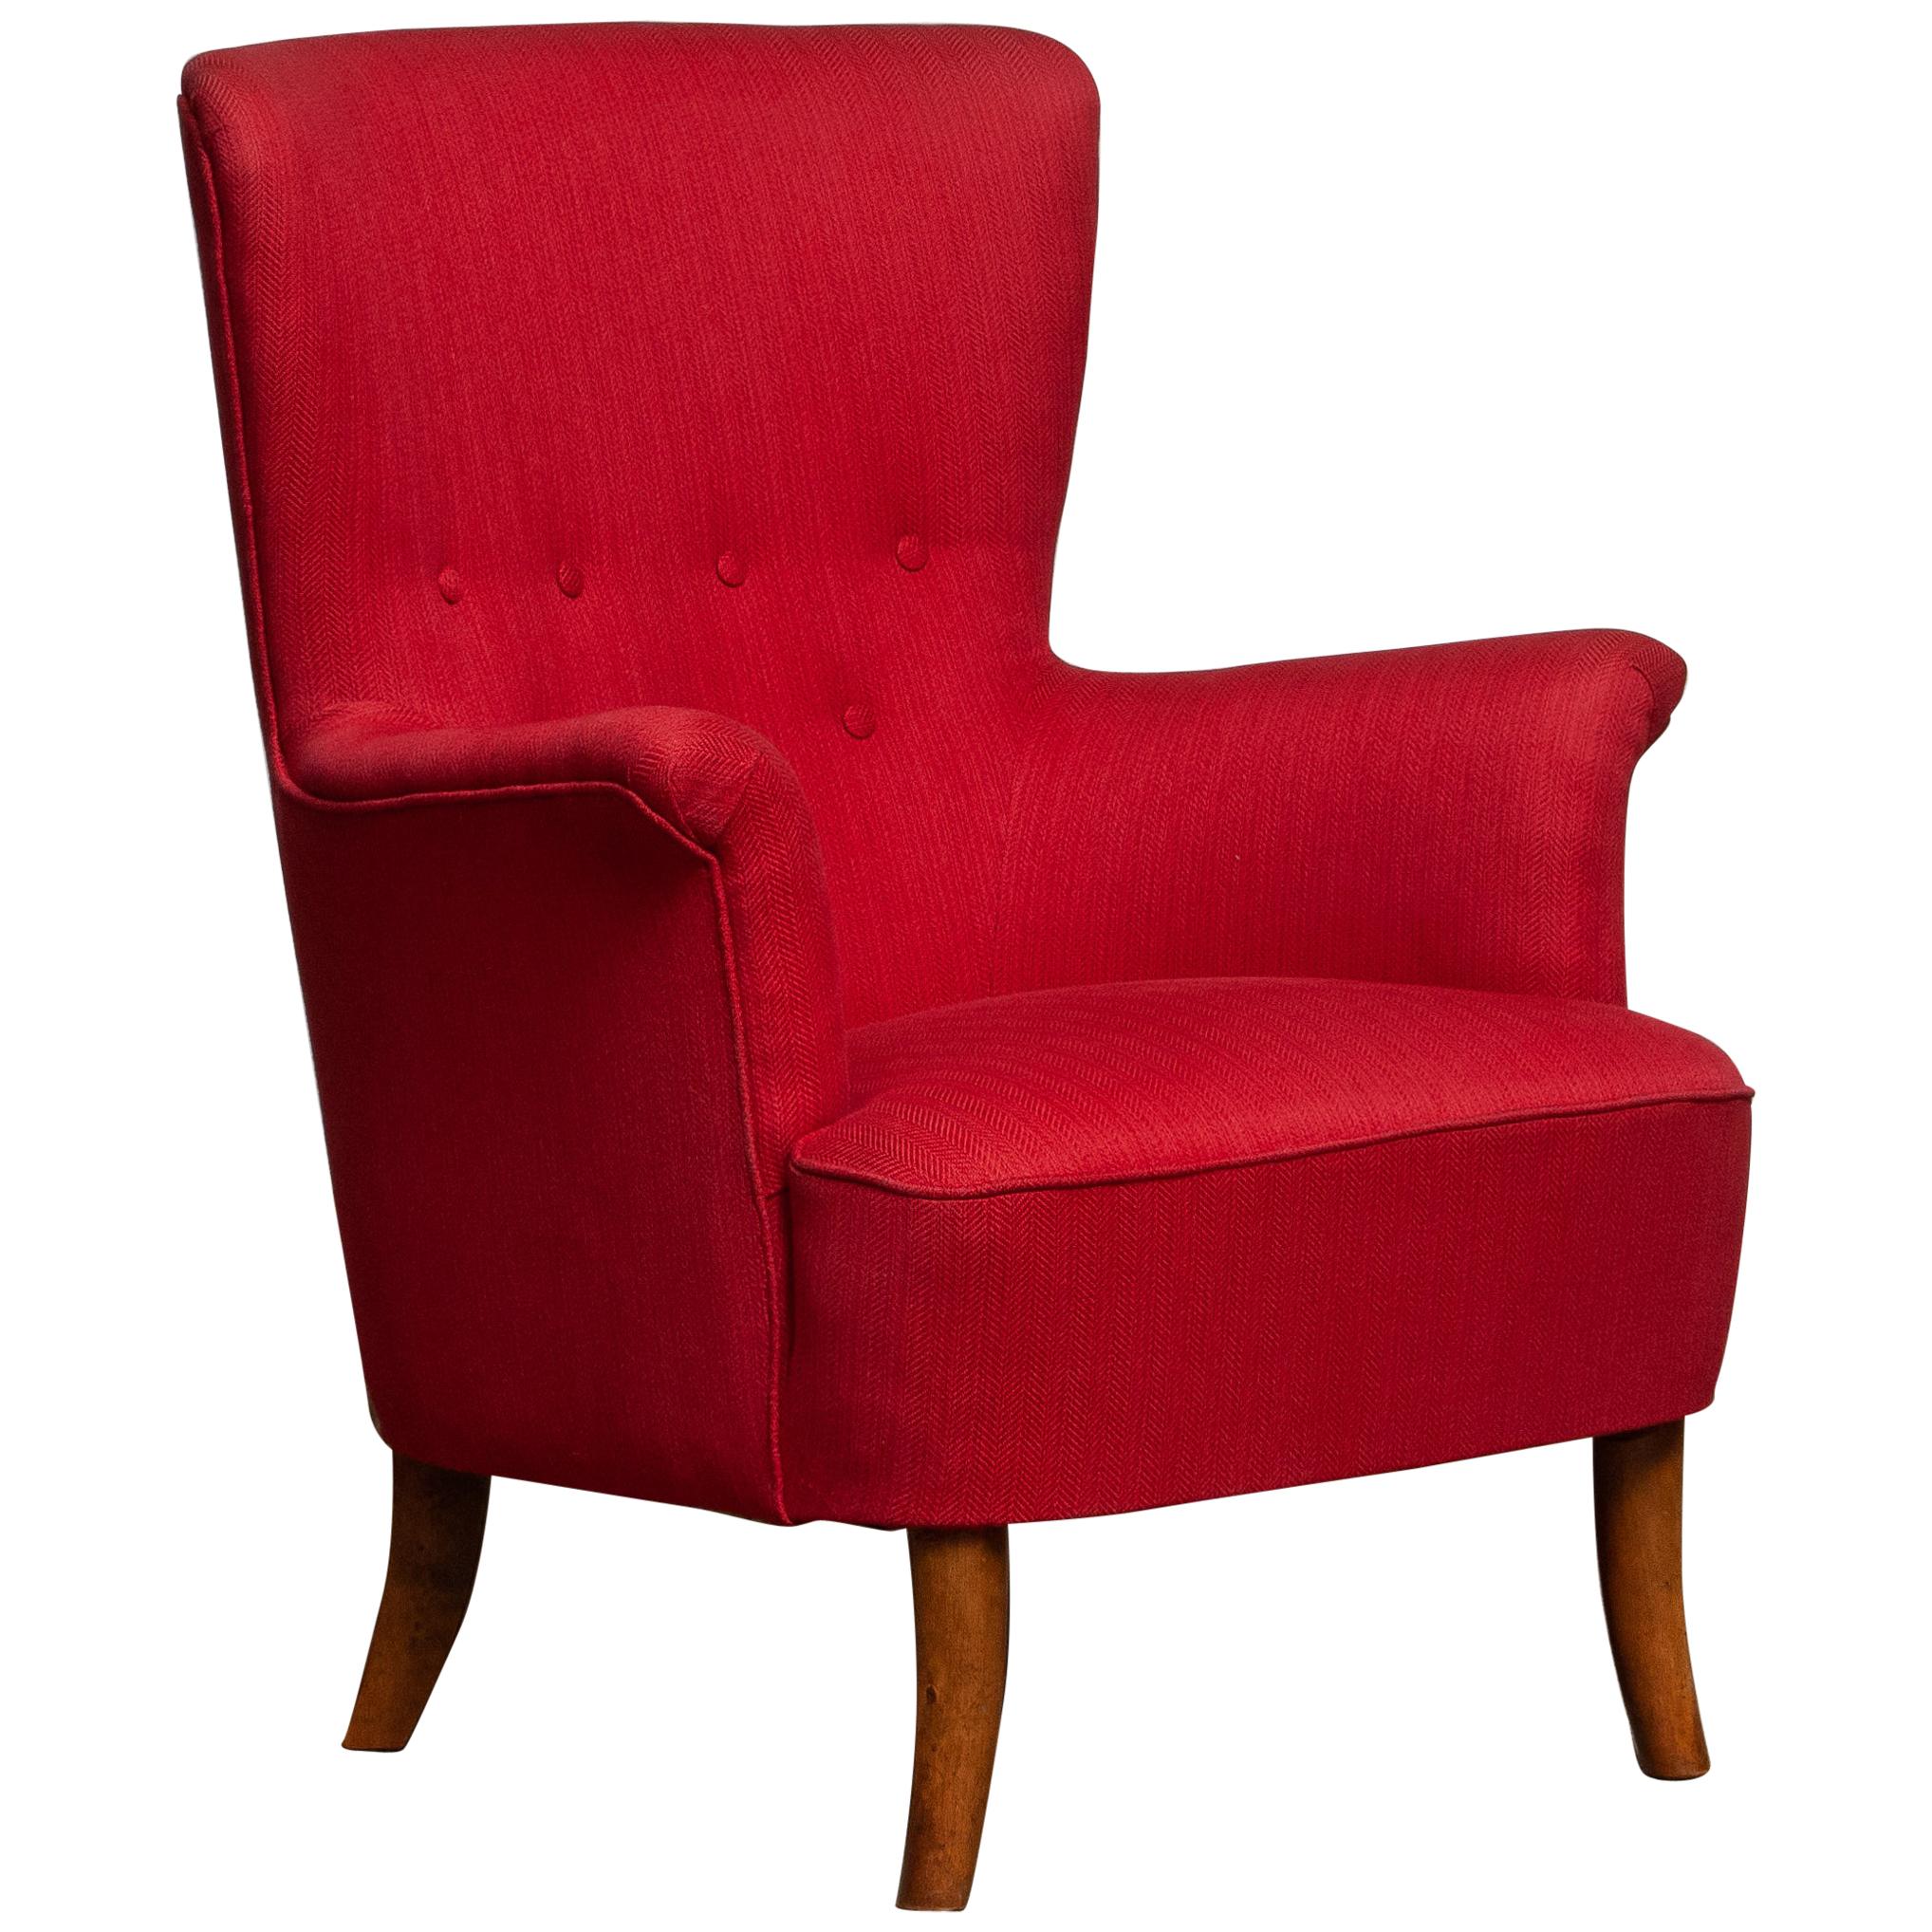 Beautiful fuchsia / red easy / lounge chair designed by Carl Malmsten for OH Sjogren, Sweden.
The overall condition is good
Period: 1940-1949.
Note that we have two in our gallery!